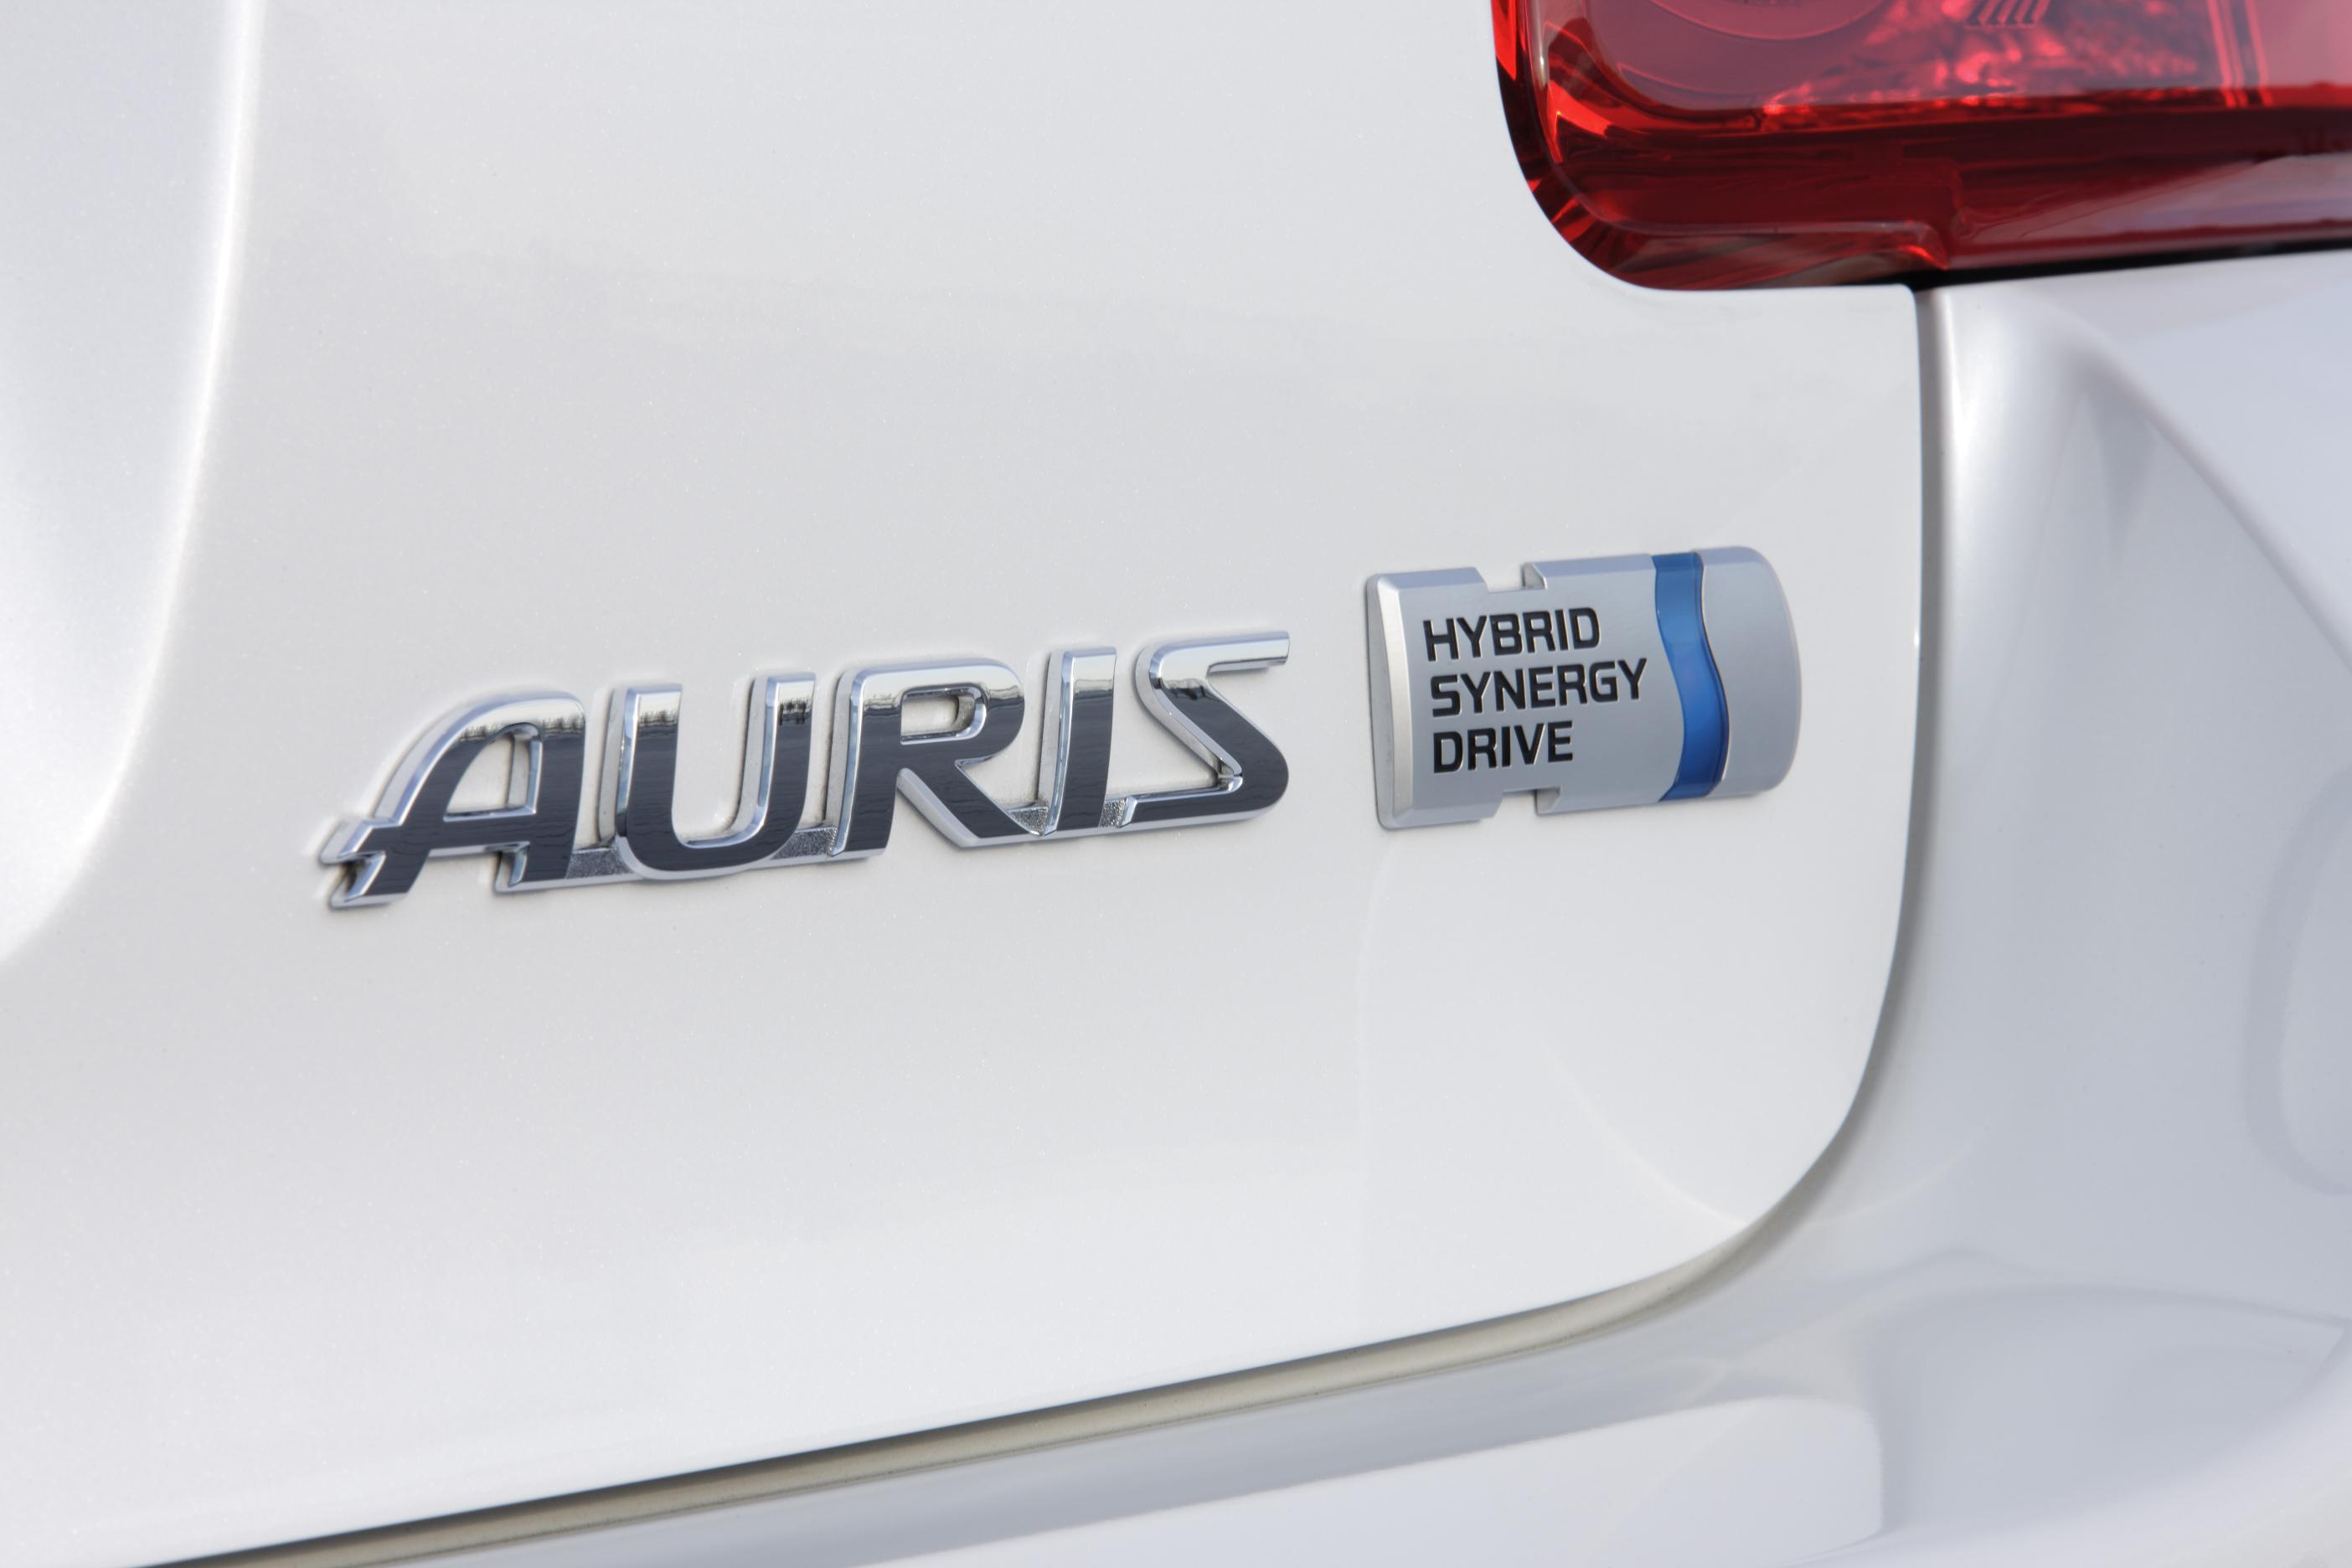 Auris hybrid clever, but will you money? - Wheel World